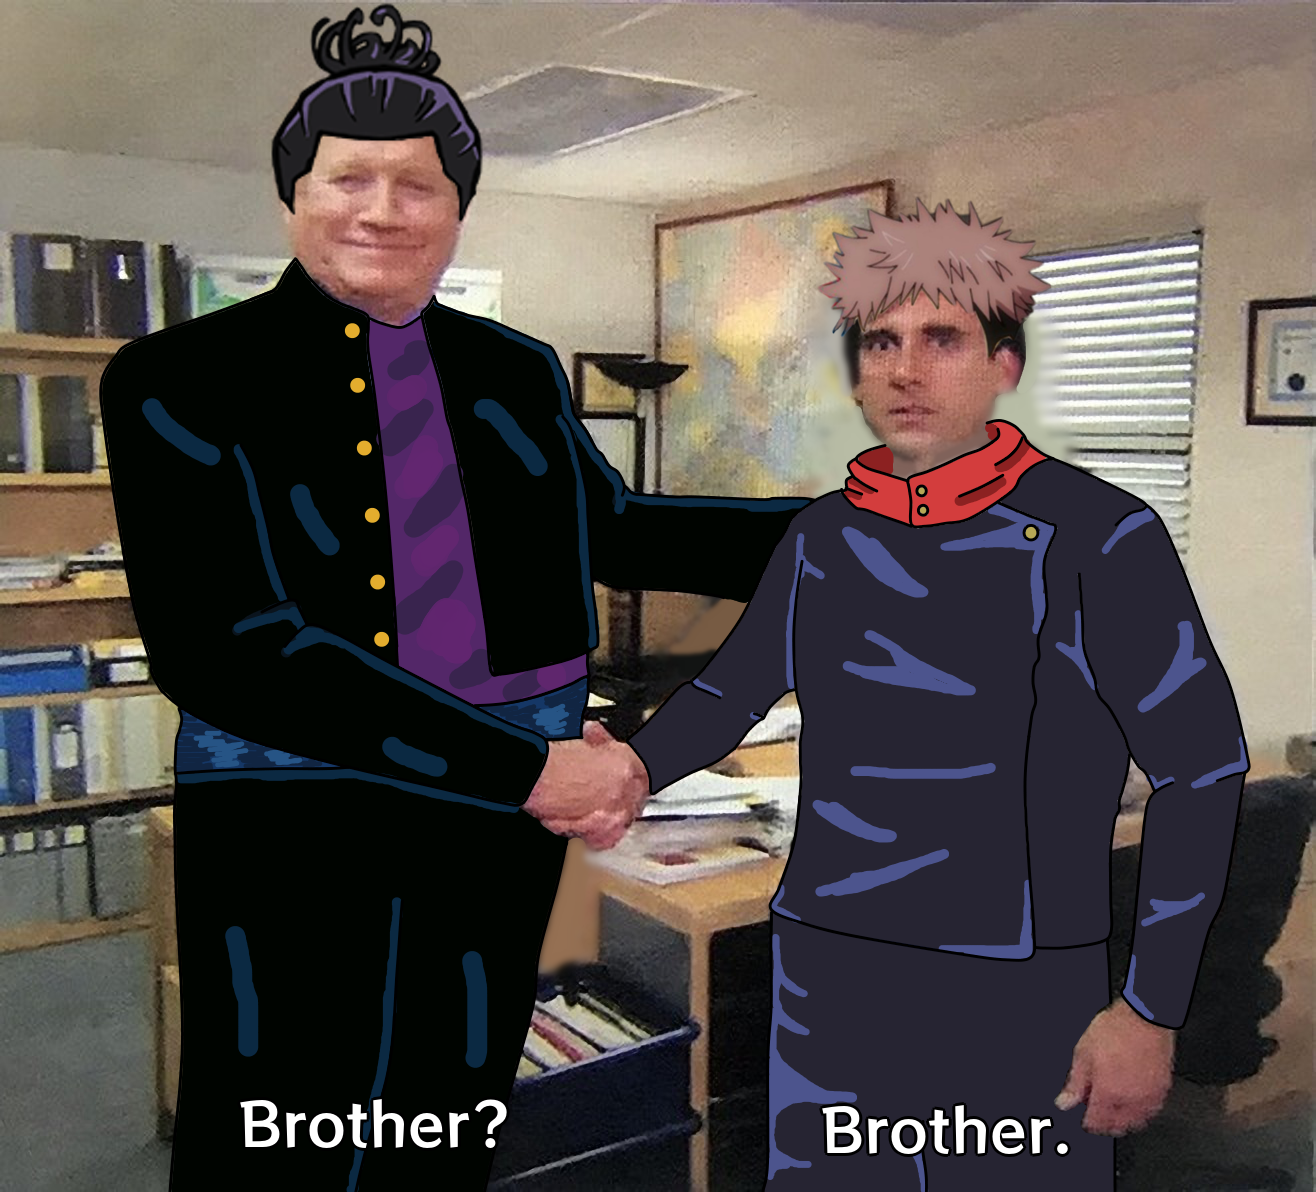 Yes, brother.